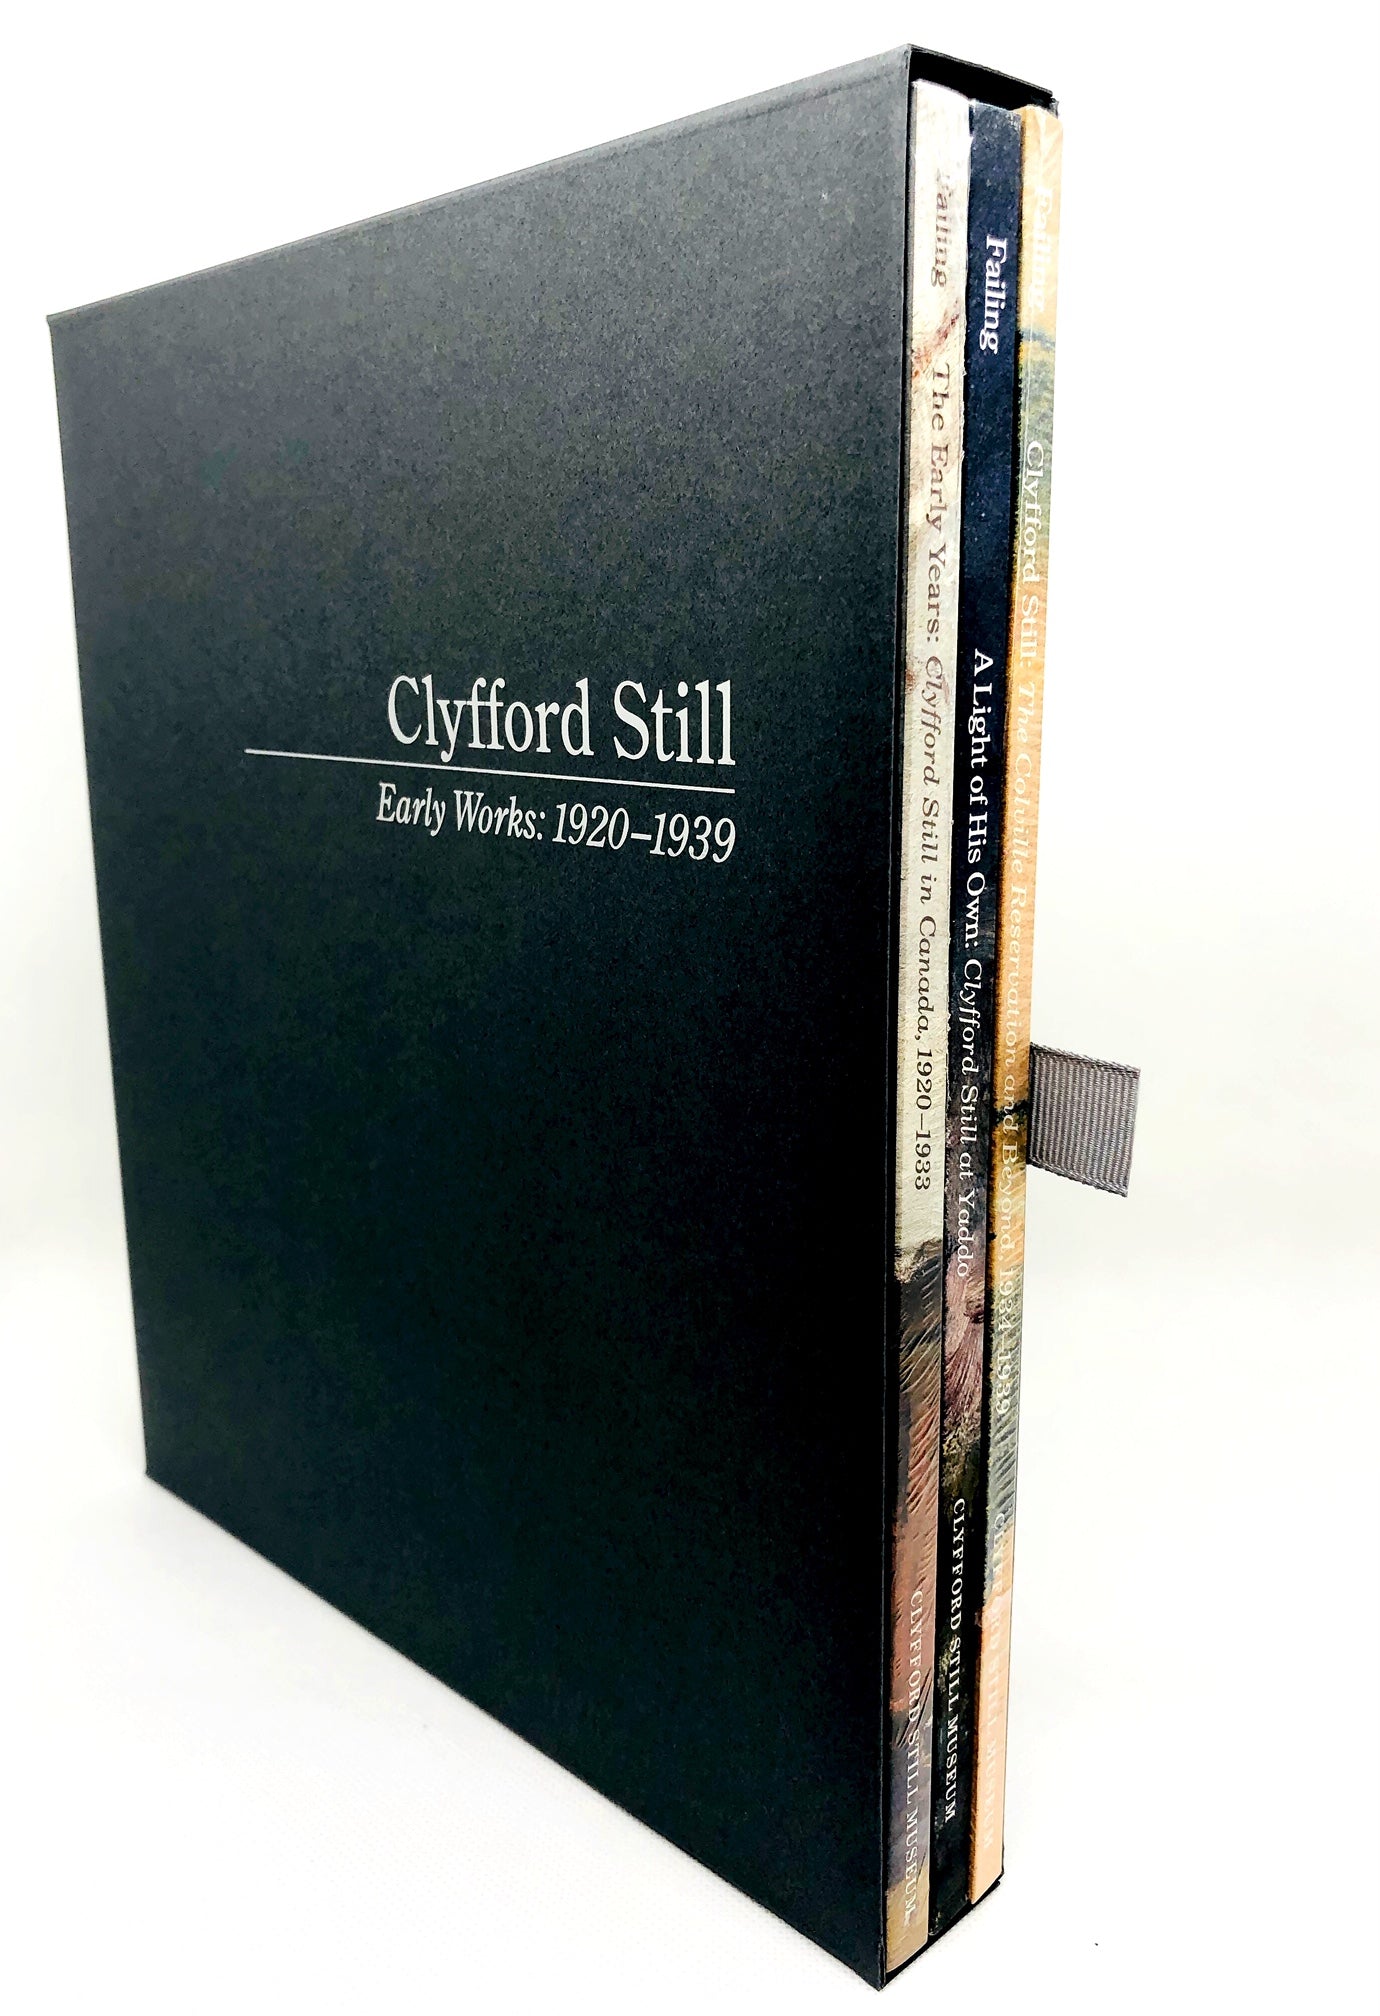 Clyfford Still, Early Works: 1920-1939 Gift Set including ‘A Light of His Own, 1920-1933’, ‘The Colville Reservation and Beyond, 1934-1939’ and ‘The Early Years: Clyfford Still in Canada, 1920-1933’. 